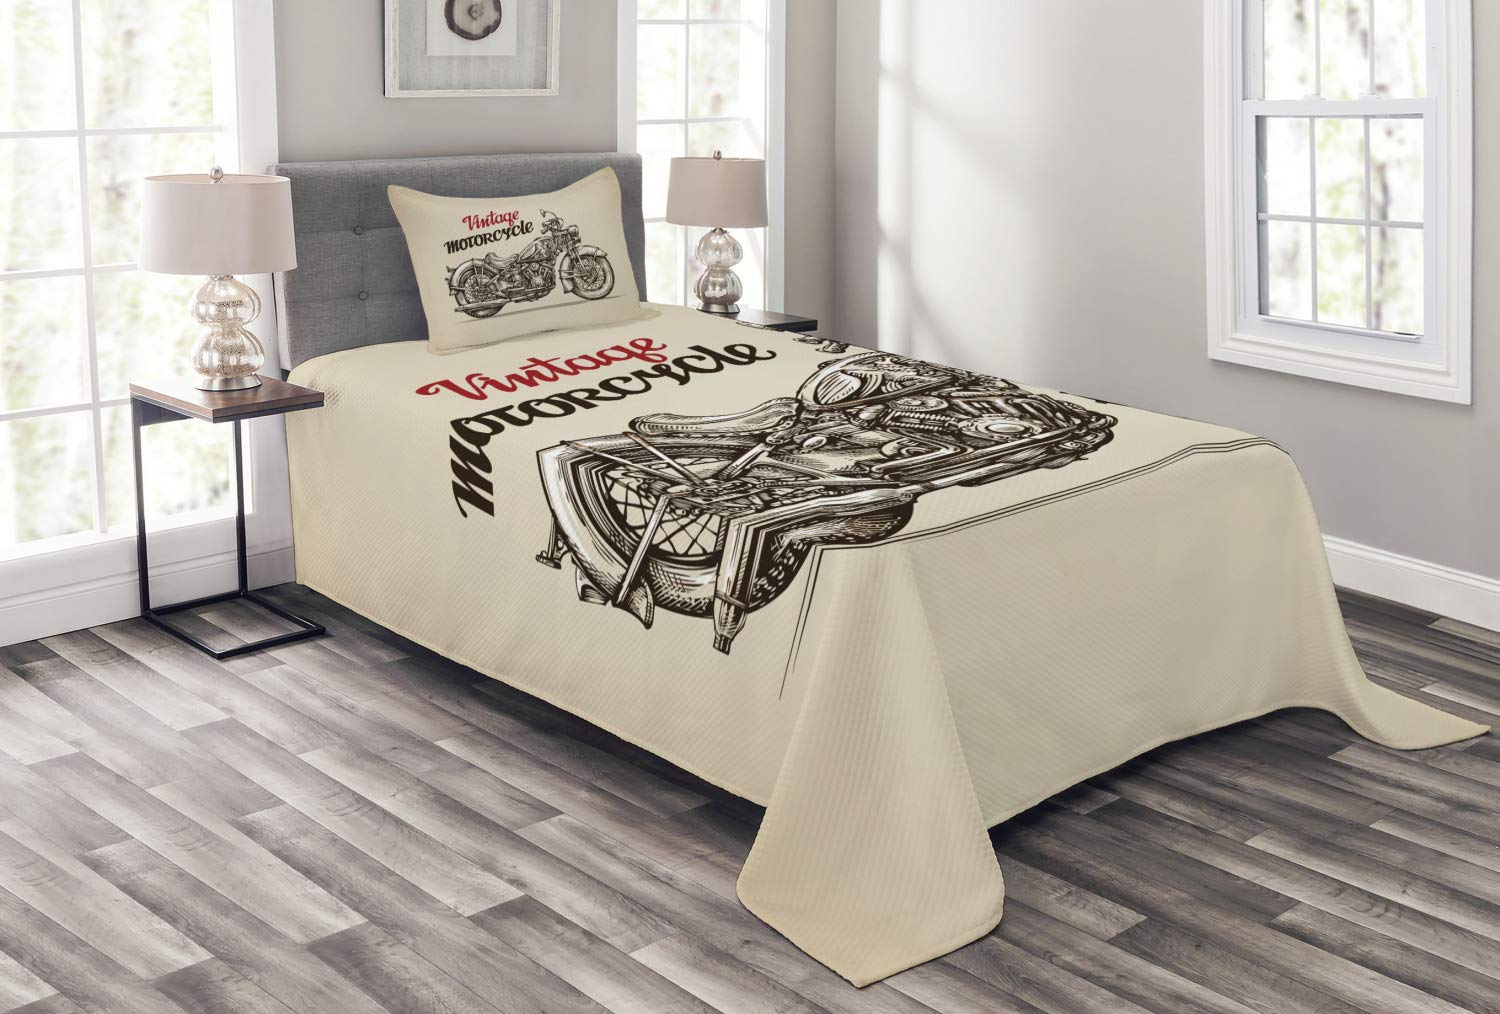 Ambesonne Motorcycle Bedspread, Hand Drawn Chopper Style Bike with Sketch Details Free Spirit of The Rider, Decorative Quilted 2 Piece Coverlet Set...